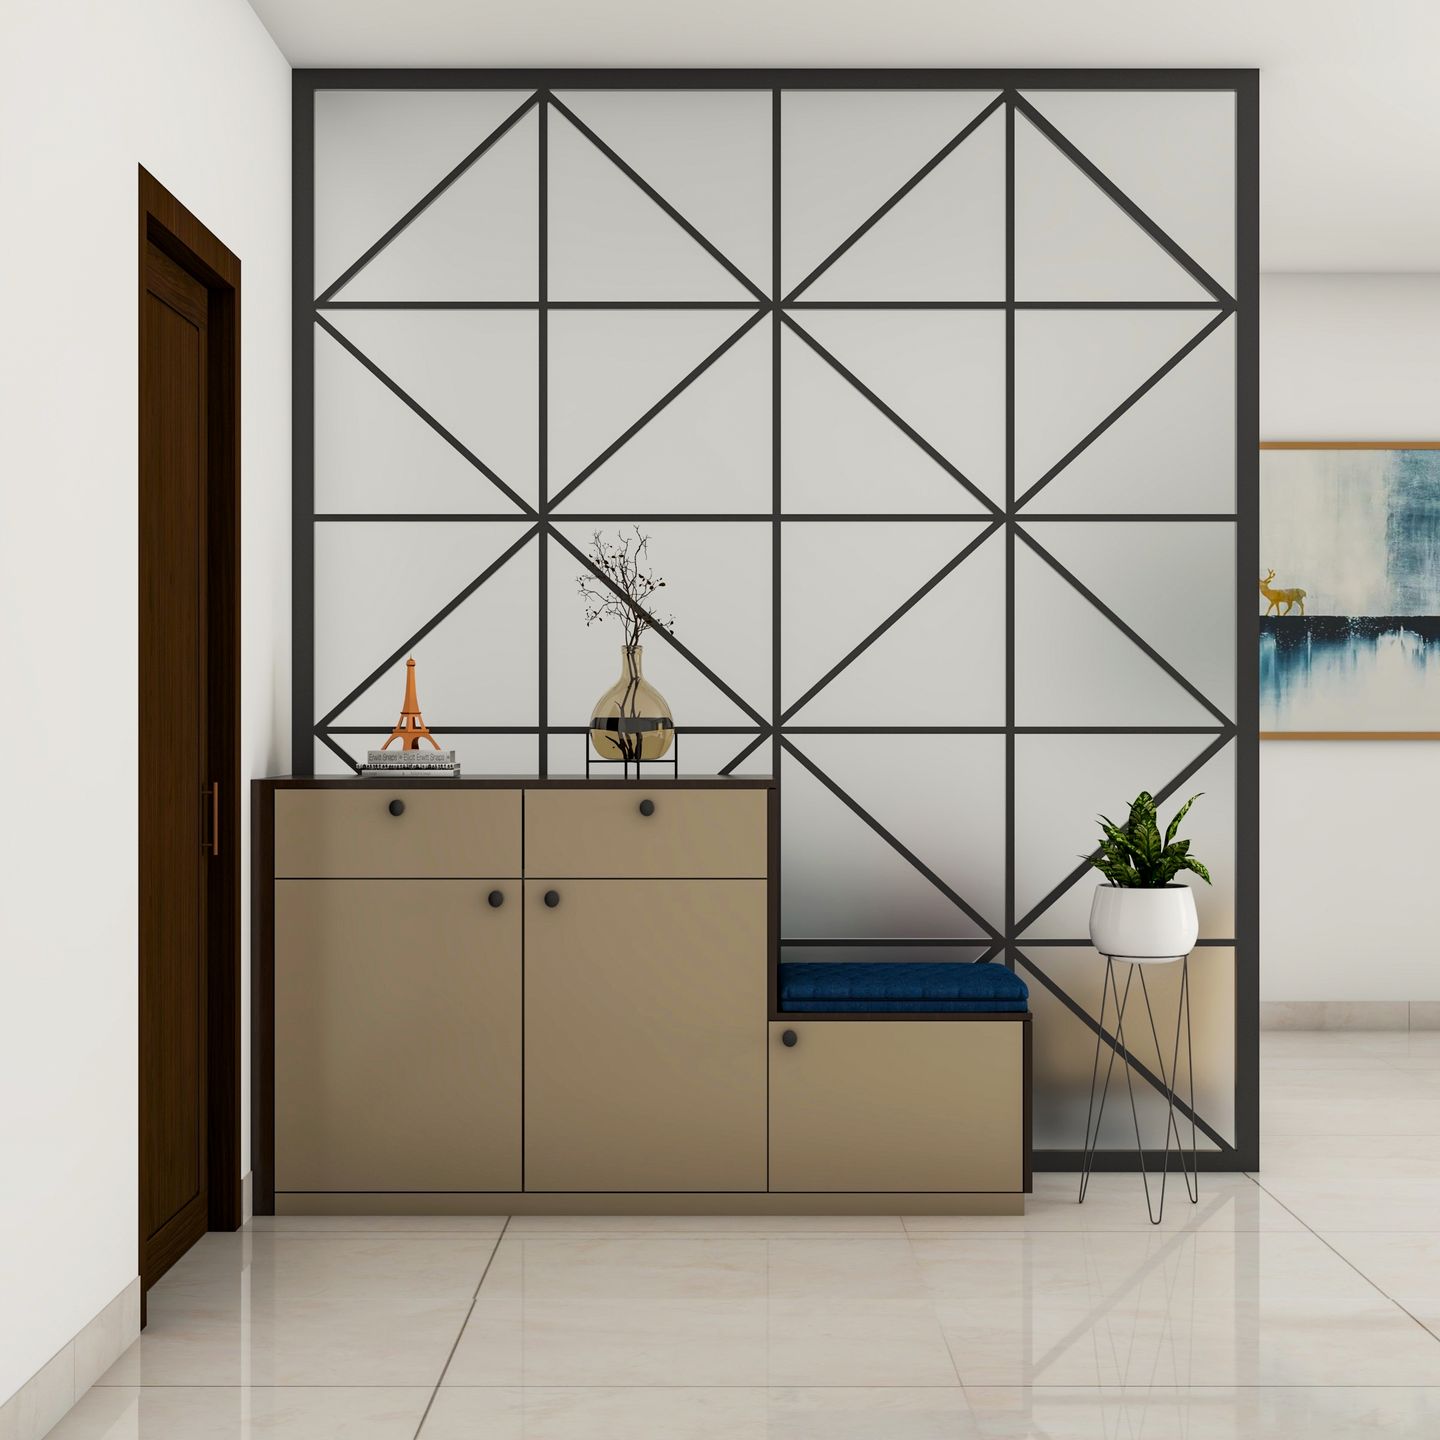 Modern Foyer Design With Frosted Glass Unit - Livspace